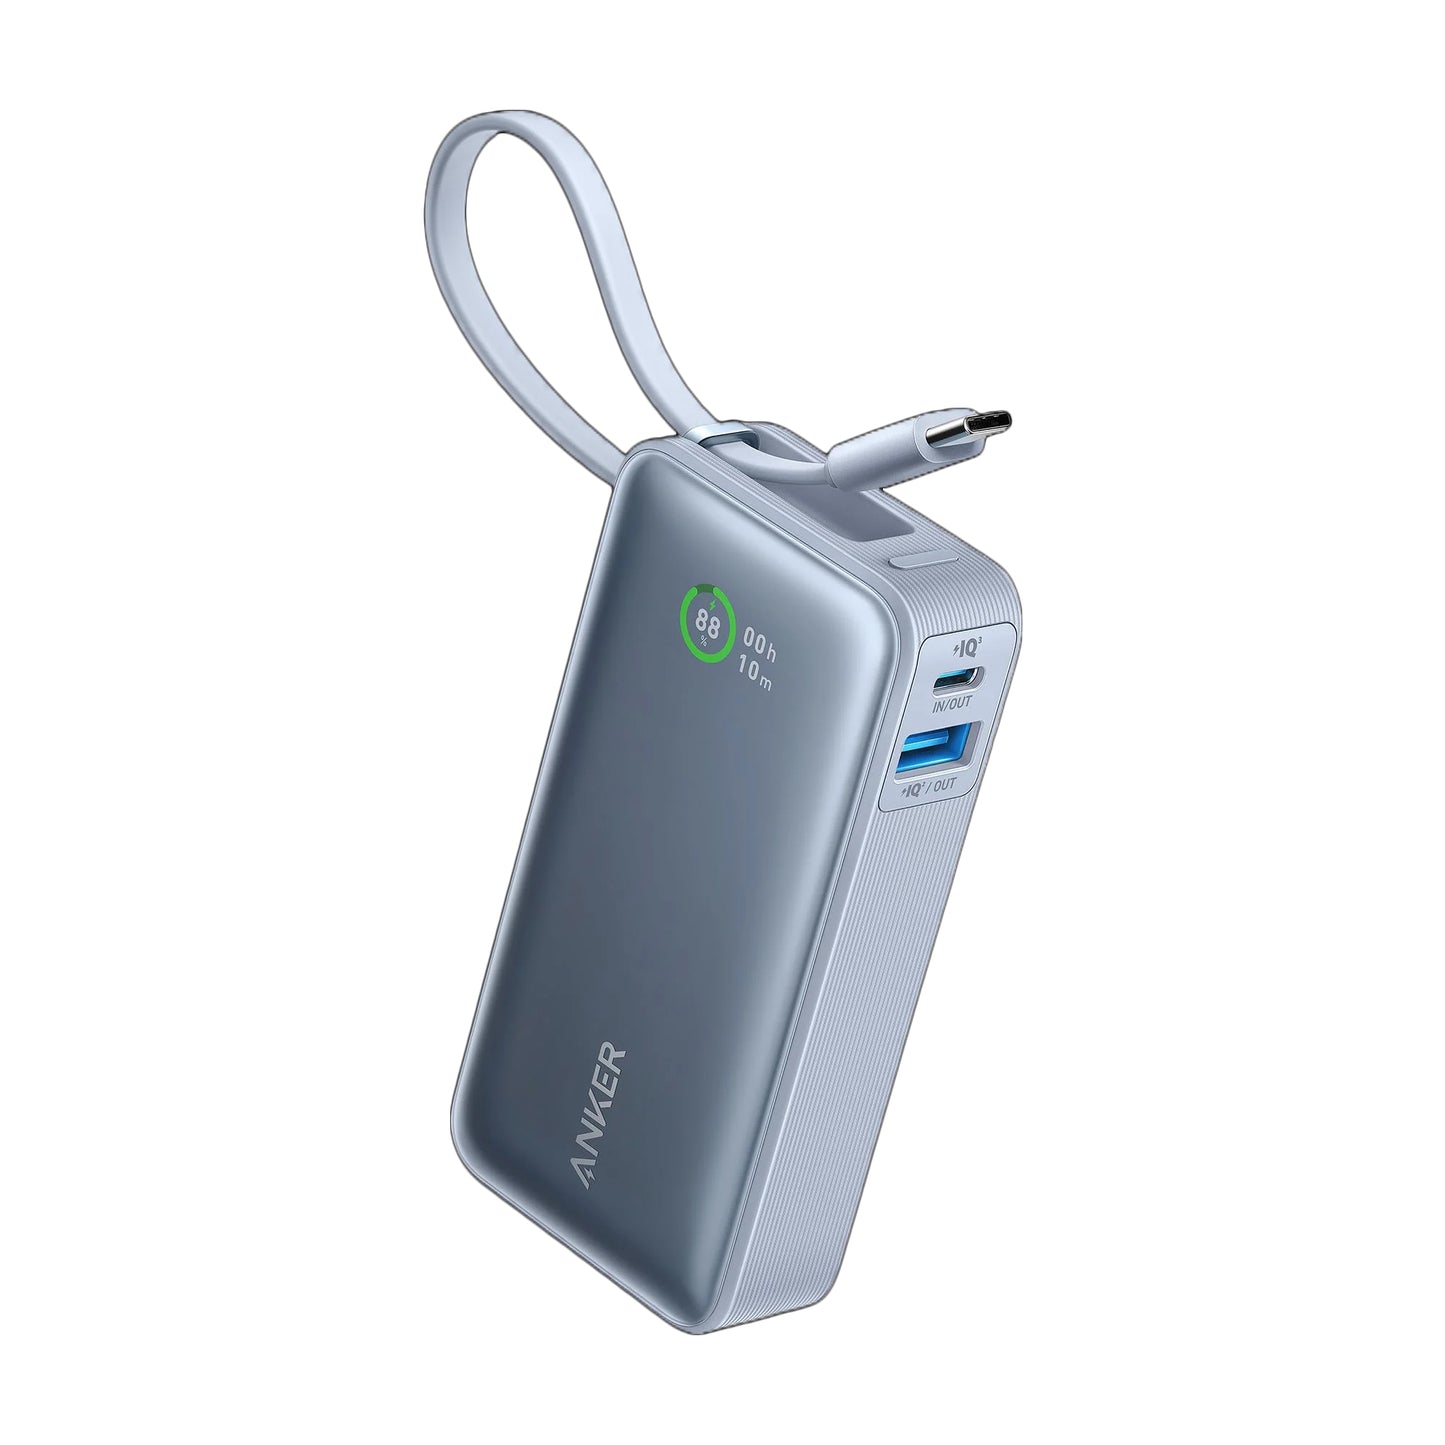 Anker Nano Power Bank (30W, Built-In USB-C Cable) 10000mAh 30W PD 行動電源